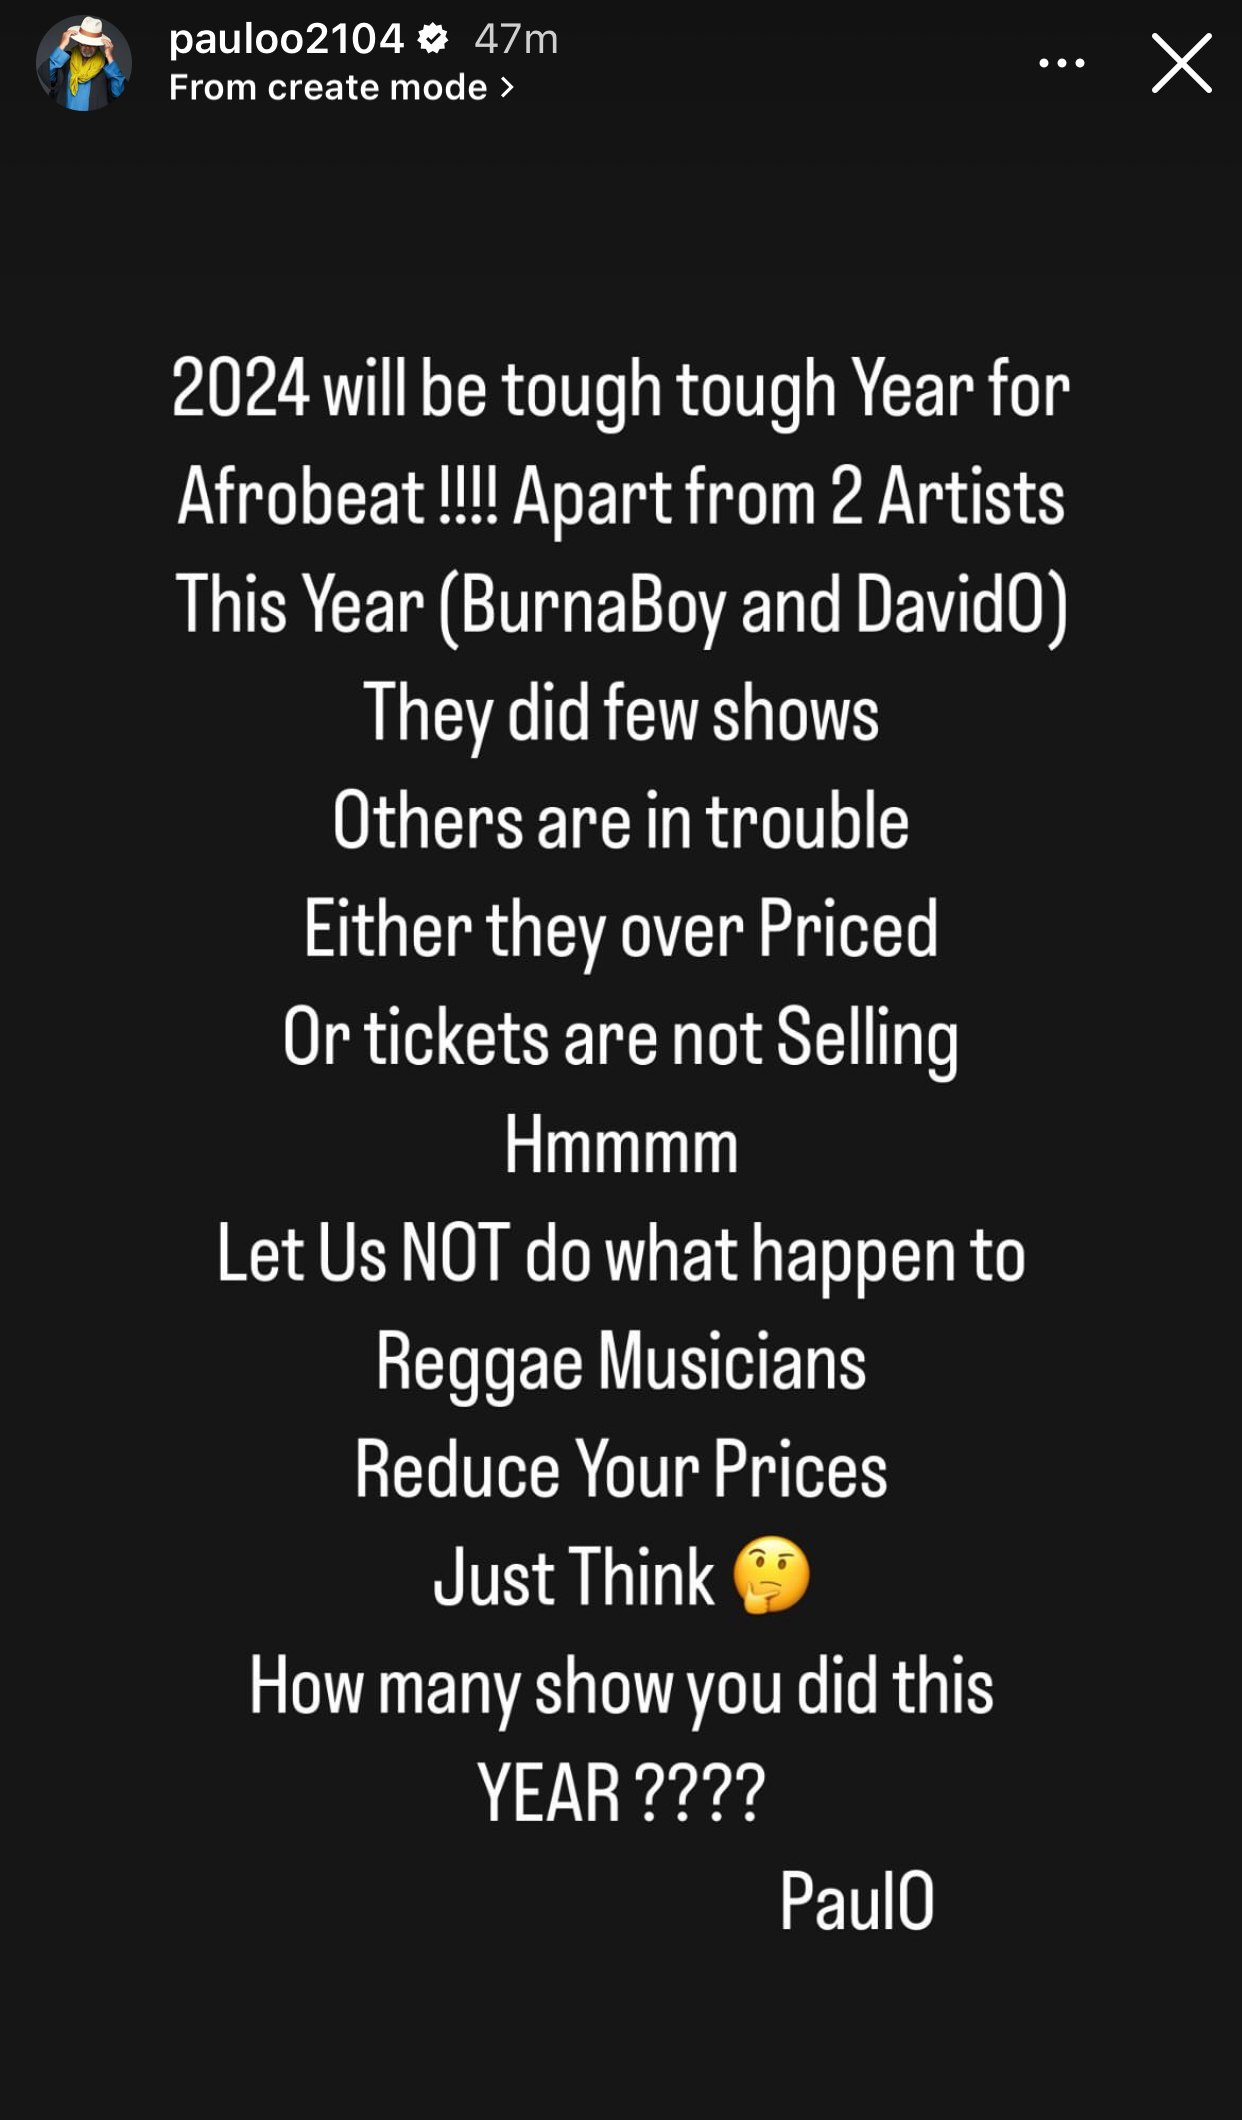 2024 will be tough tough Year for Afrobeat. Apart from BurnaBoy and Davido, others are in trouble - Paul O